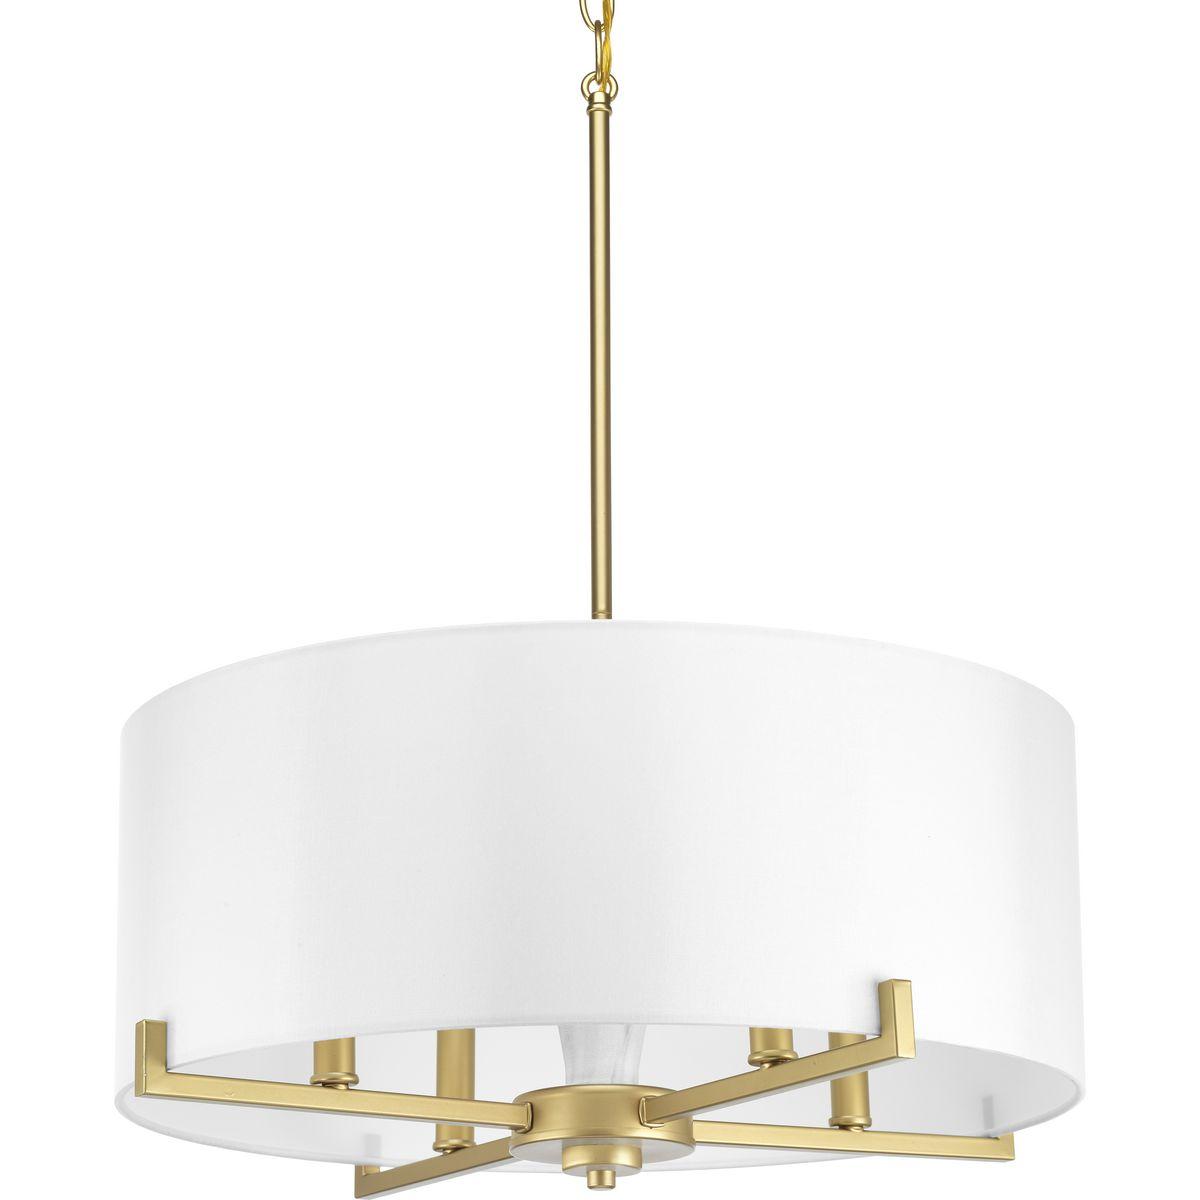 Hubbell P500108-078 An intriguing fashion-forward lighting collection, Palacio pairs a Vintage Gold finish with faux white marble column for a stunningly elegant design. White silk shade complement gold accents to create a statement-making style. Four-light pendant is Ideal 